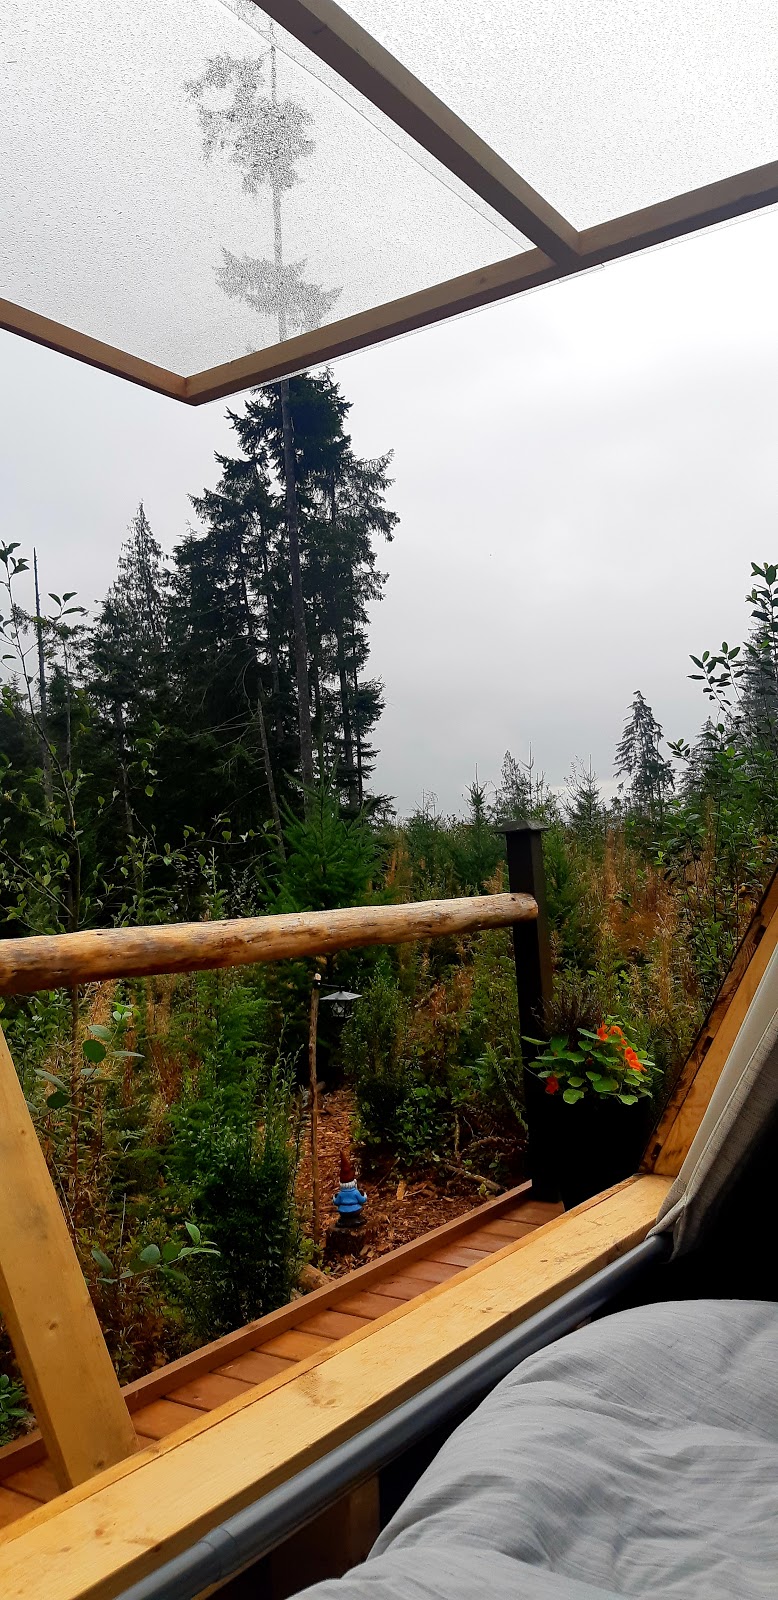 Cloud 9 Glamping | lodging | 2860 Kirby Creek Rd, Shirley, BC V9Z 1G4, Canada | 7783507611 OR +1 778-350-7611